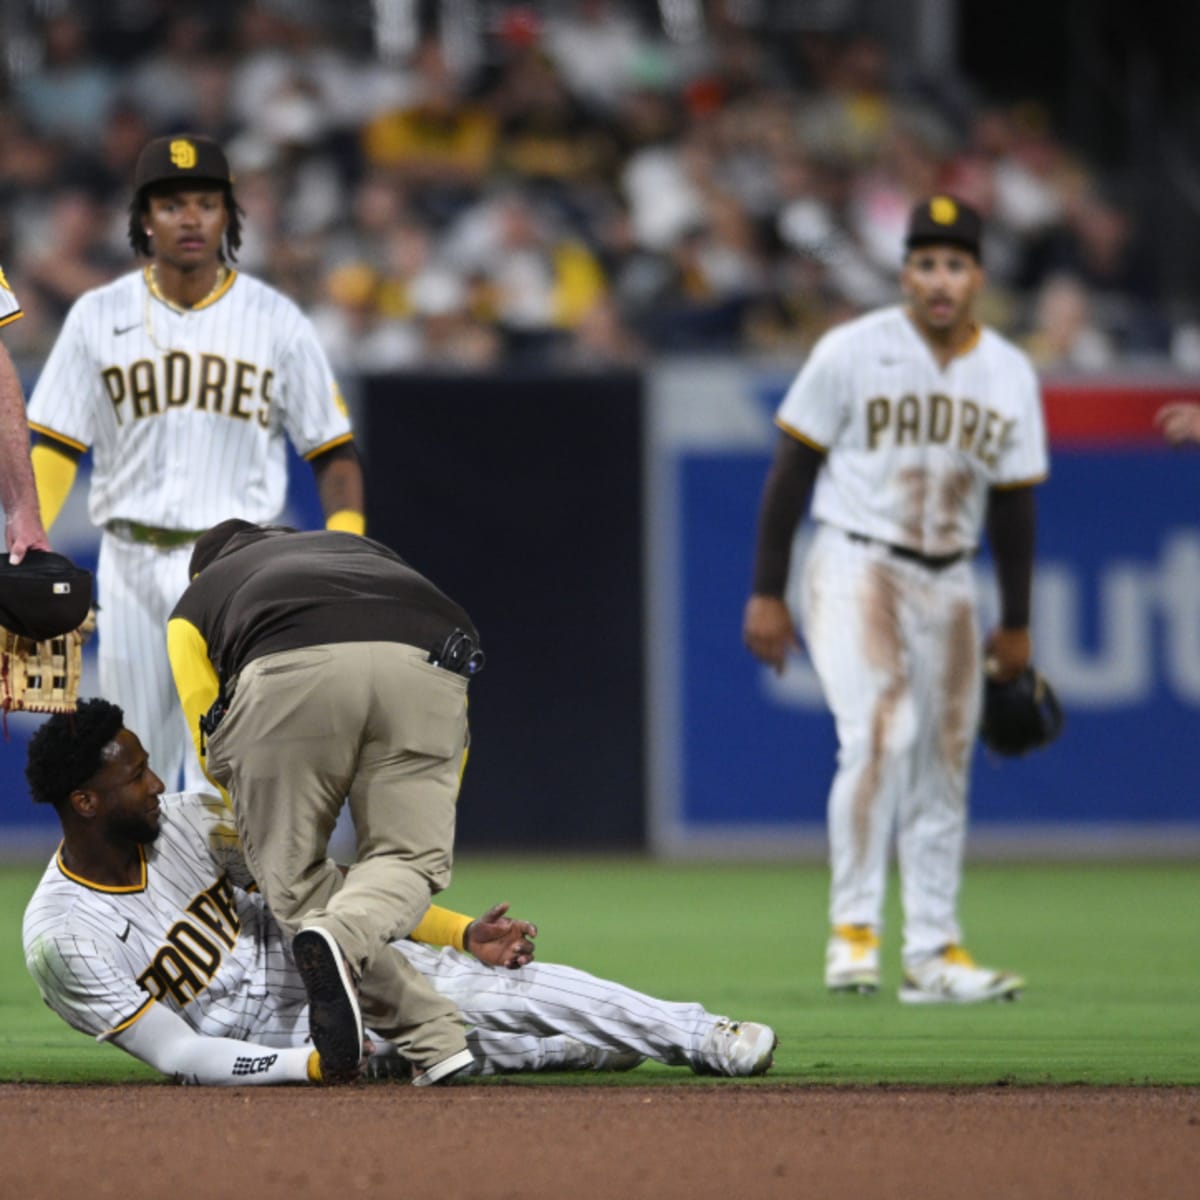 Padres Player Collapses on Field After Scary Collision with Teammate